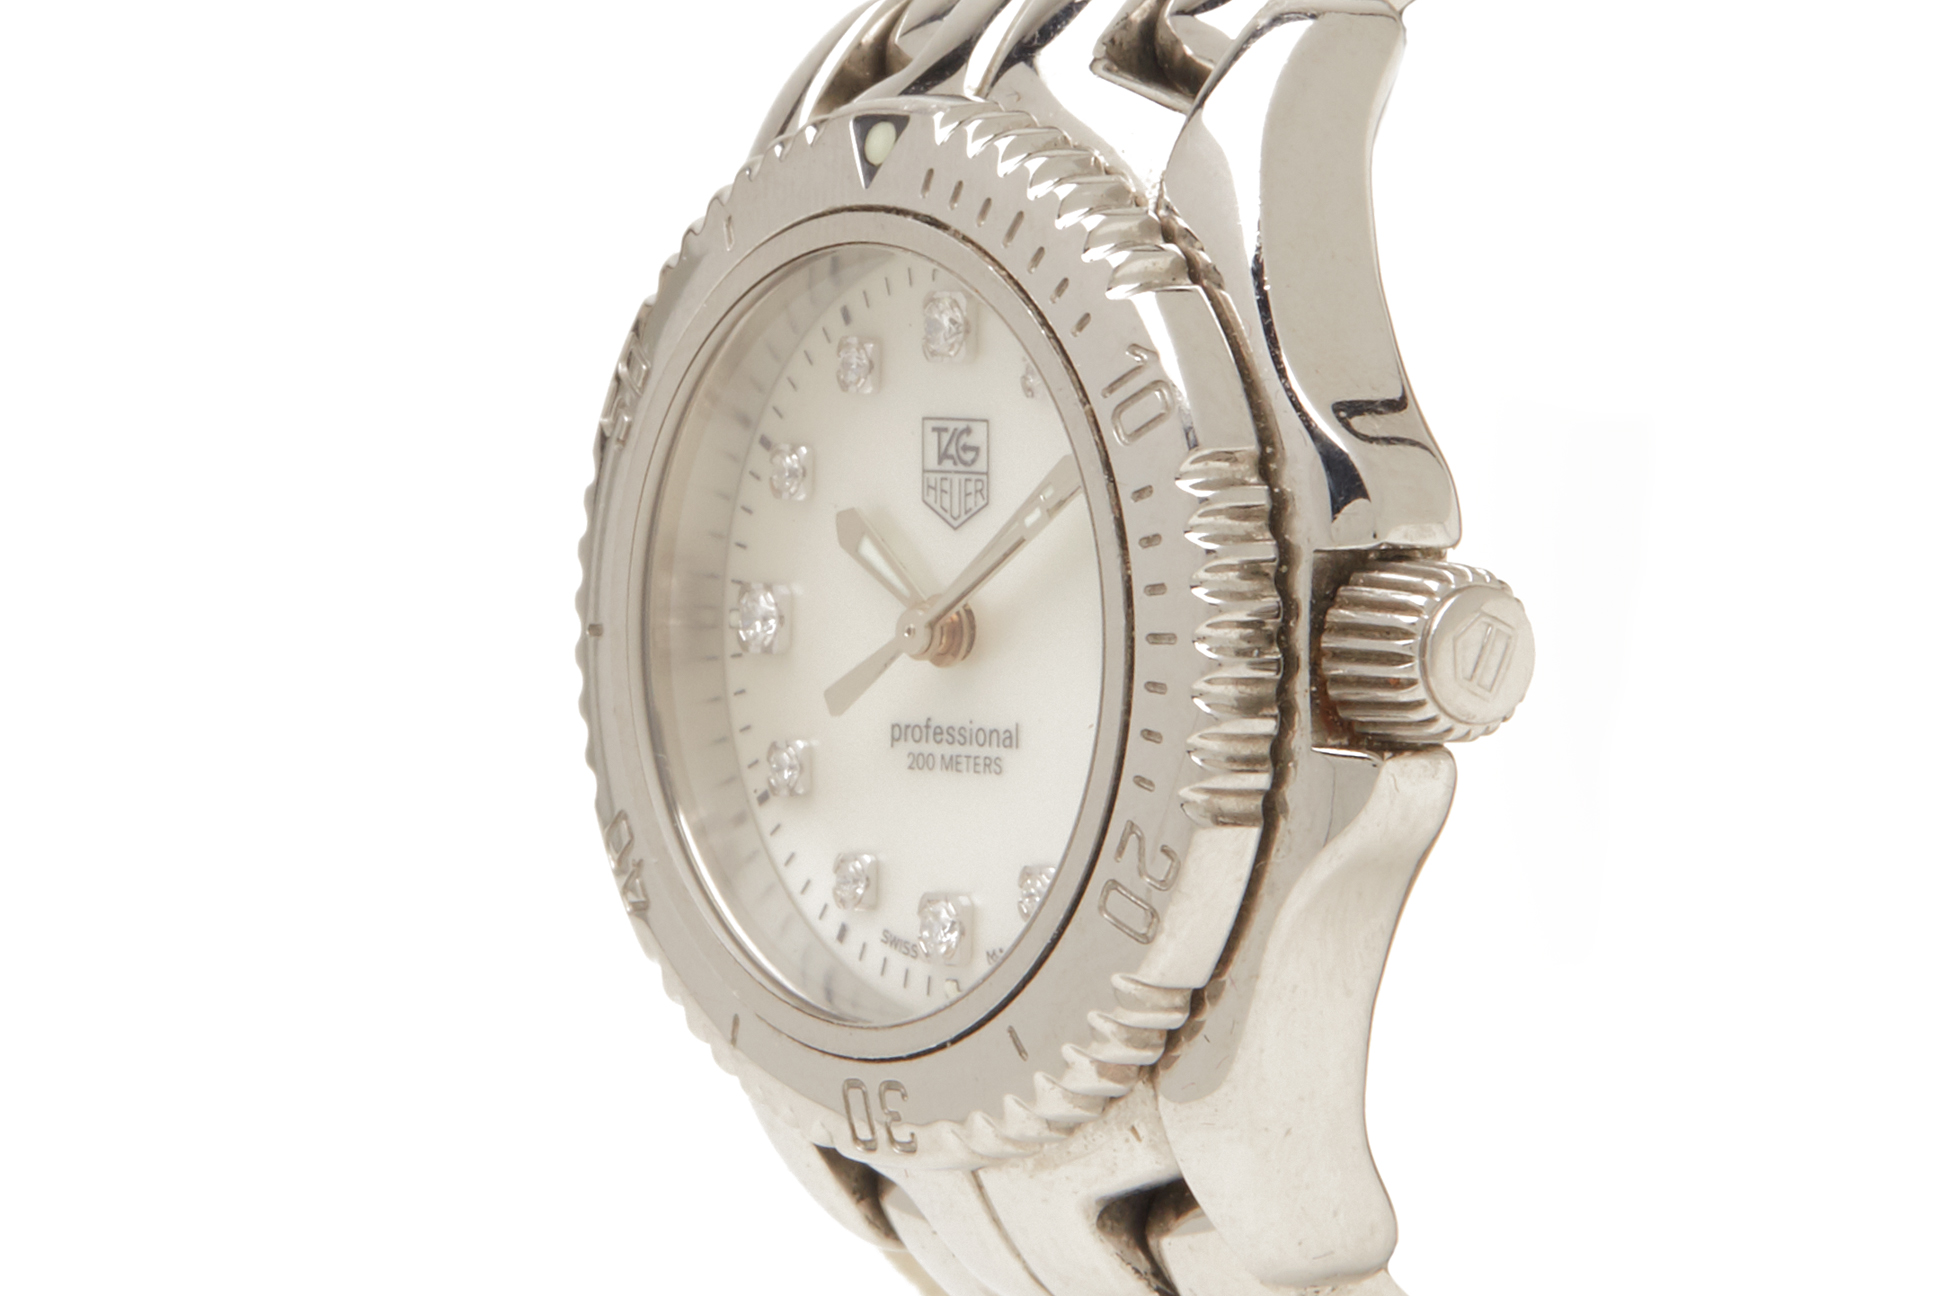 A TAG HEUER PROFESSIONAL LADIES STAINLESS STEEL BRACELET WATCH - Image 3 of 4